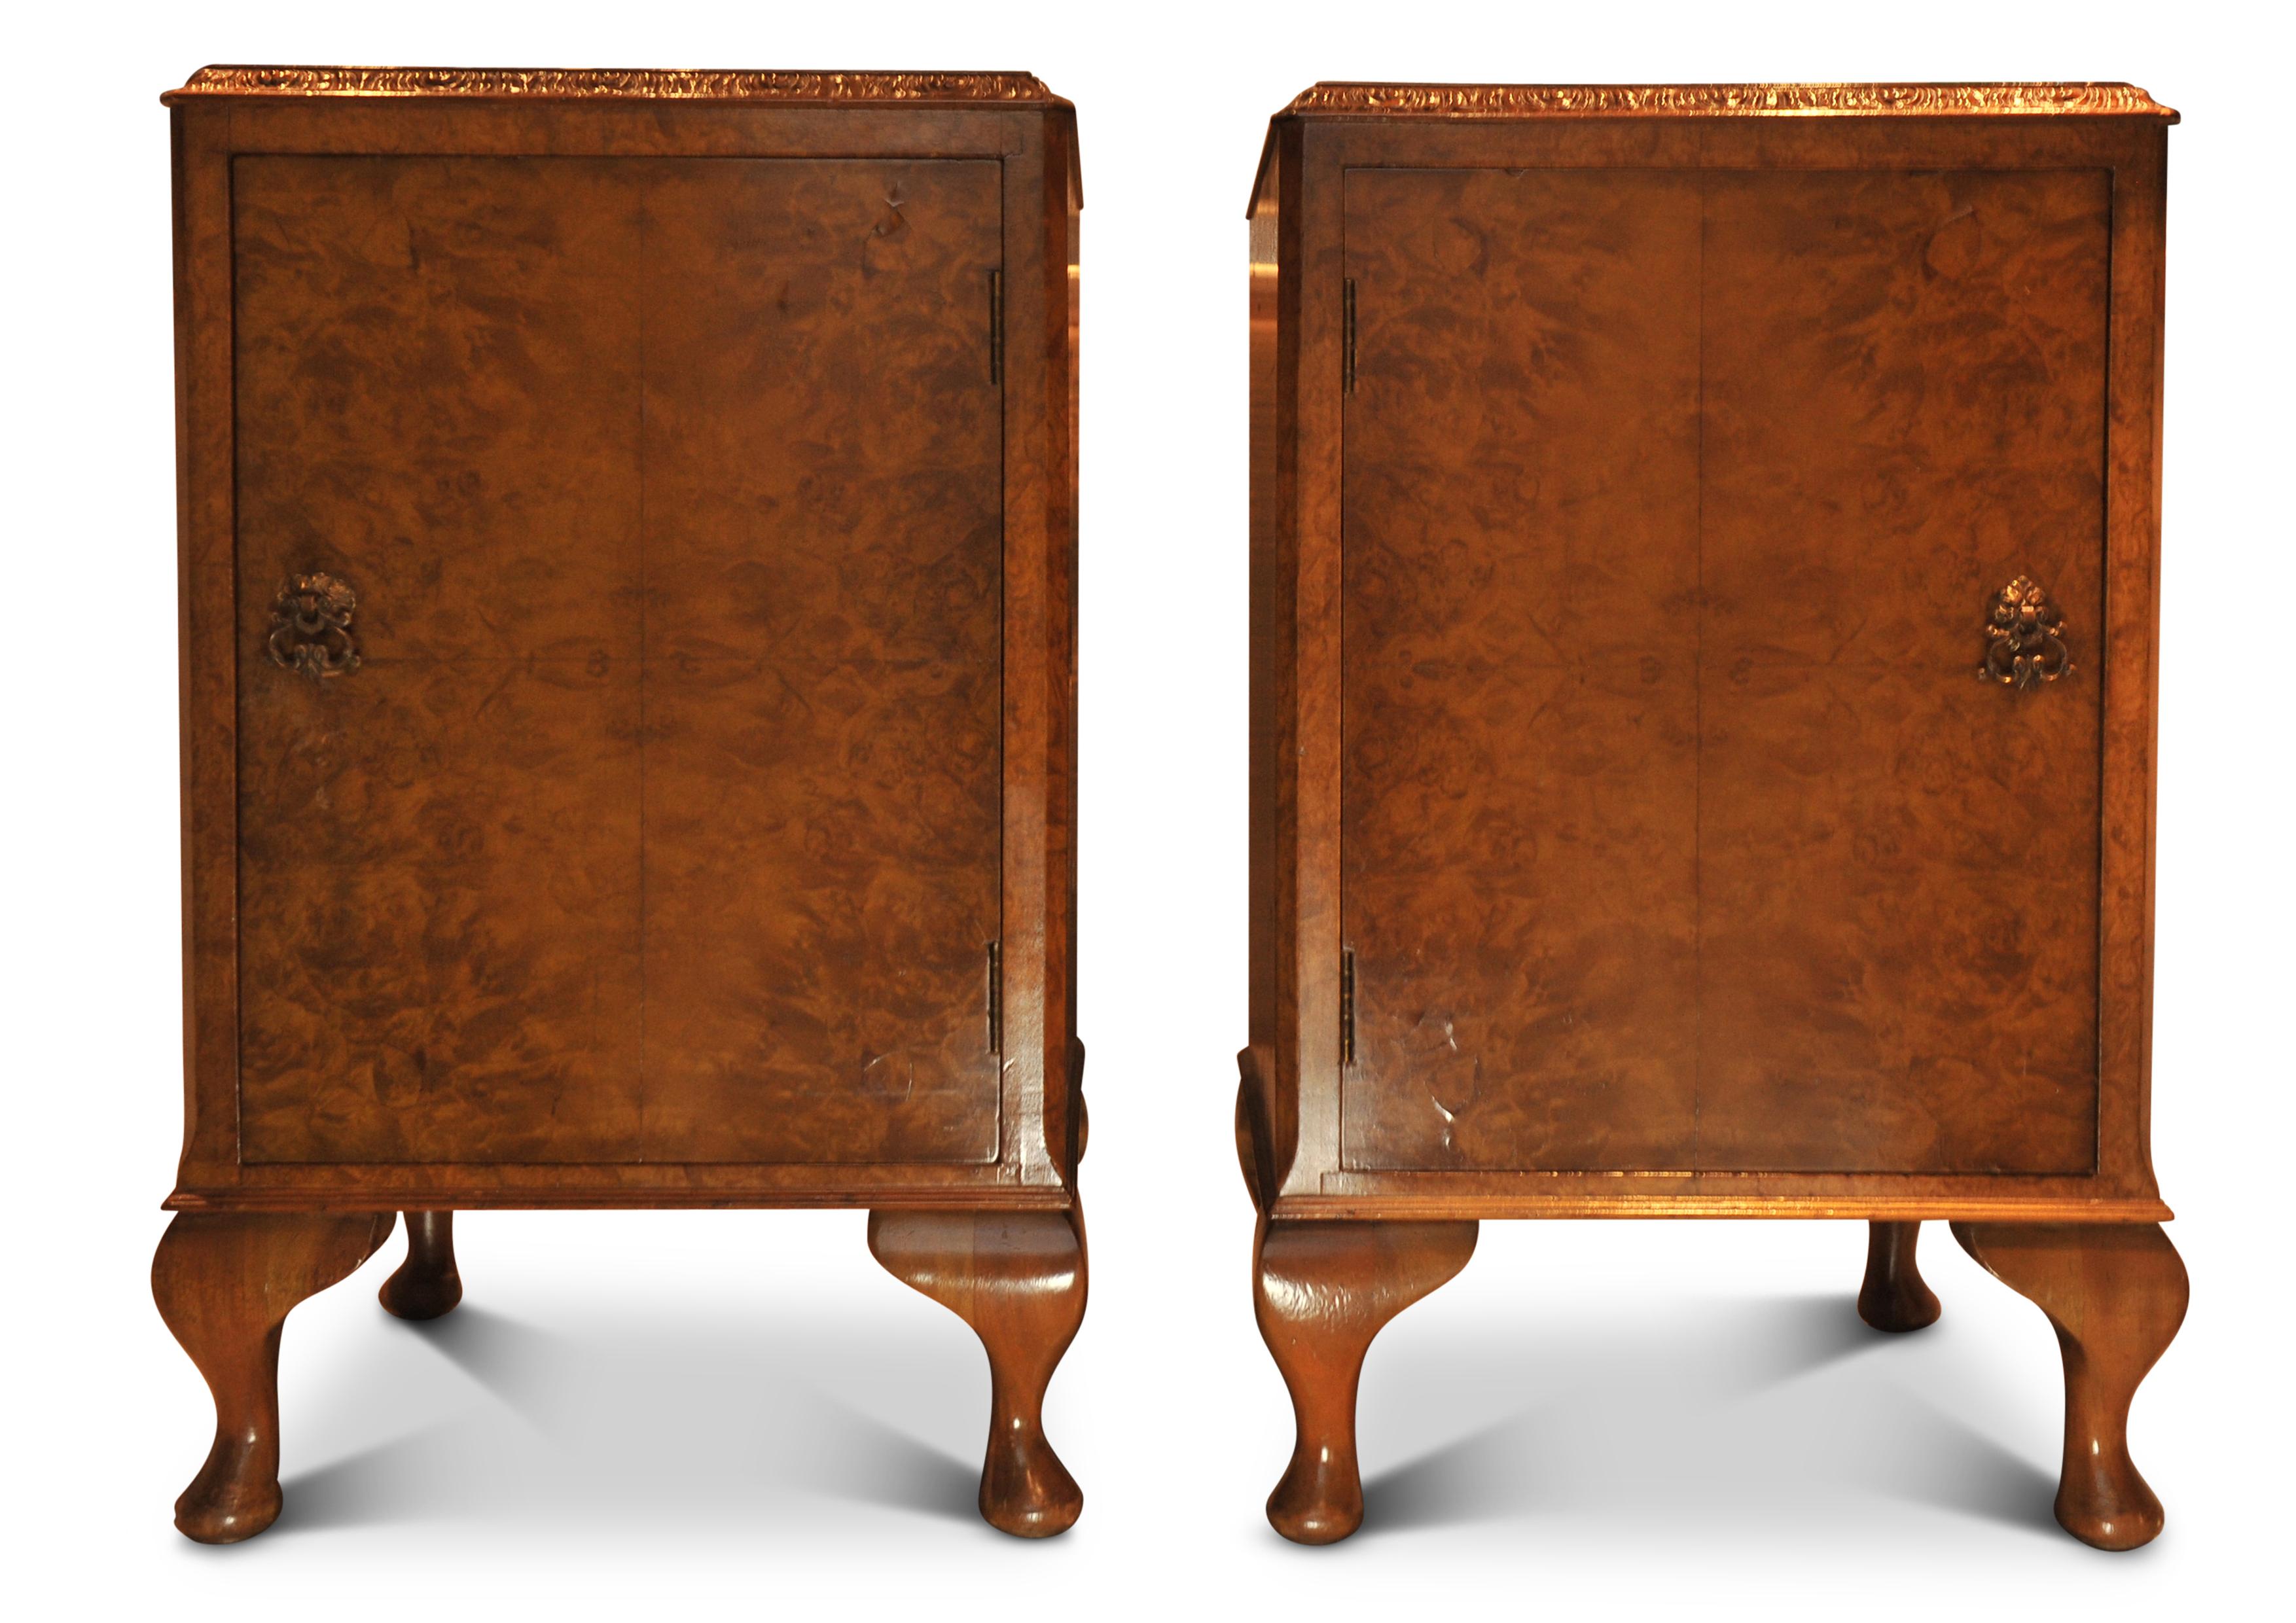 Art Deco Burr Walnut Night Stands On Cabriole Legs & Figured Walnut Fronts In Good Condition For Sale In High Wycombe, GB